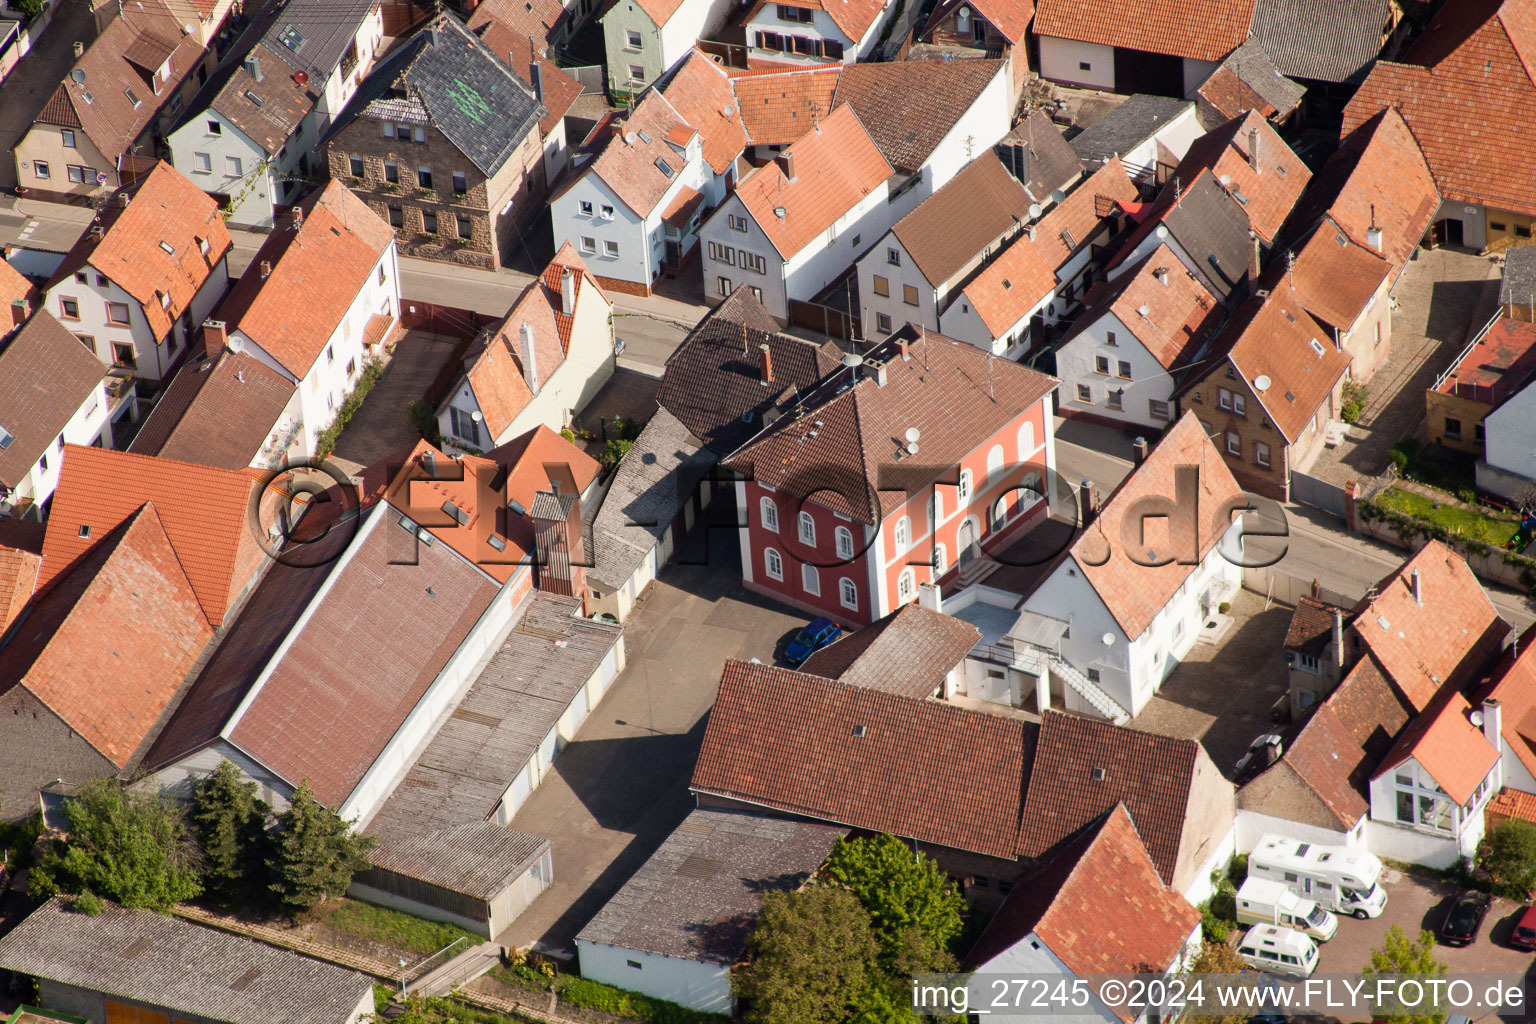 District Wollmesheim in Landau in der Pfalz in the state Rhineland-Palatinate, Germany out of the air